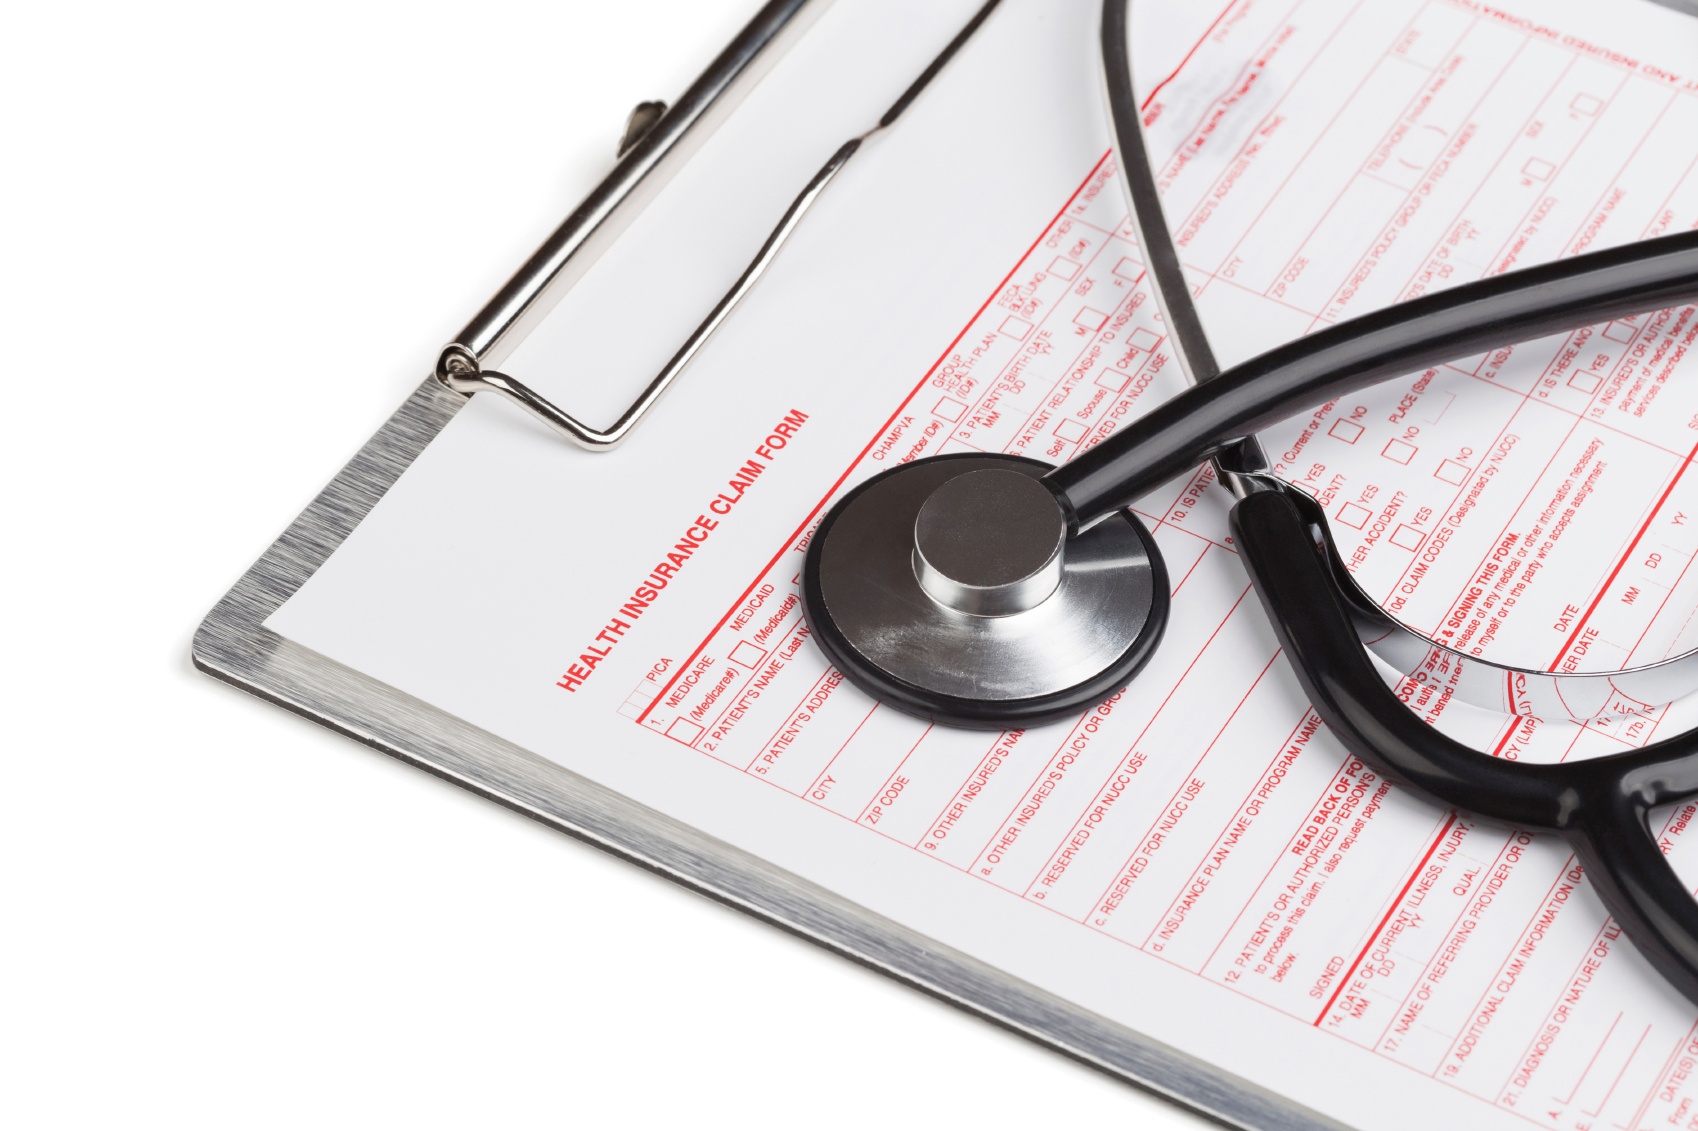 Important Medical Documents in Personal Injury Lawsuits